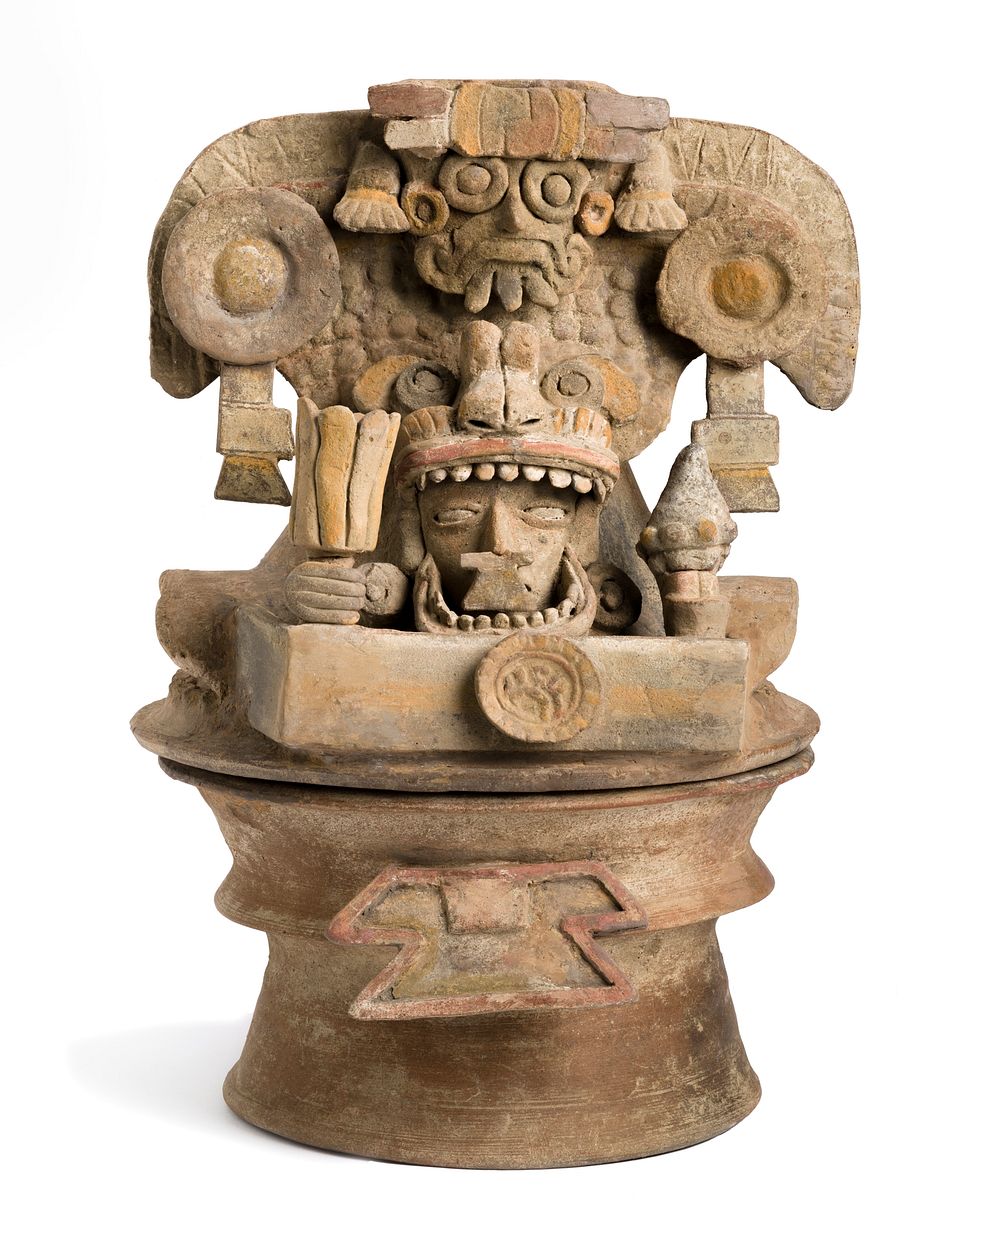 Teotihuacan-Style Censer with Ancestor and Storm God